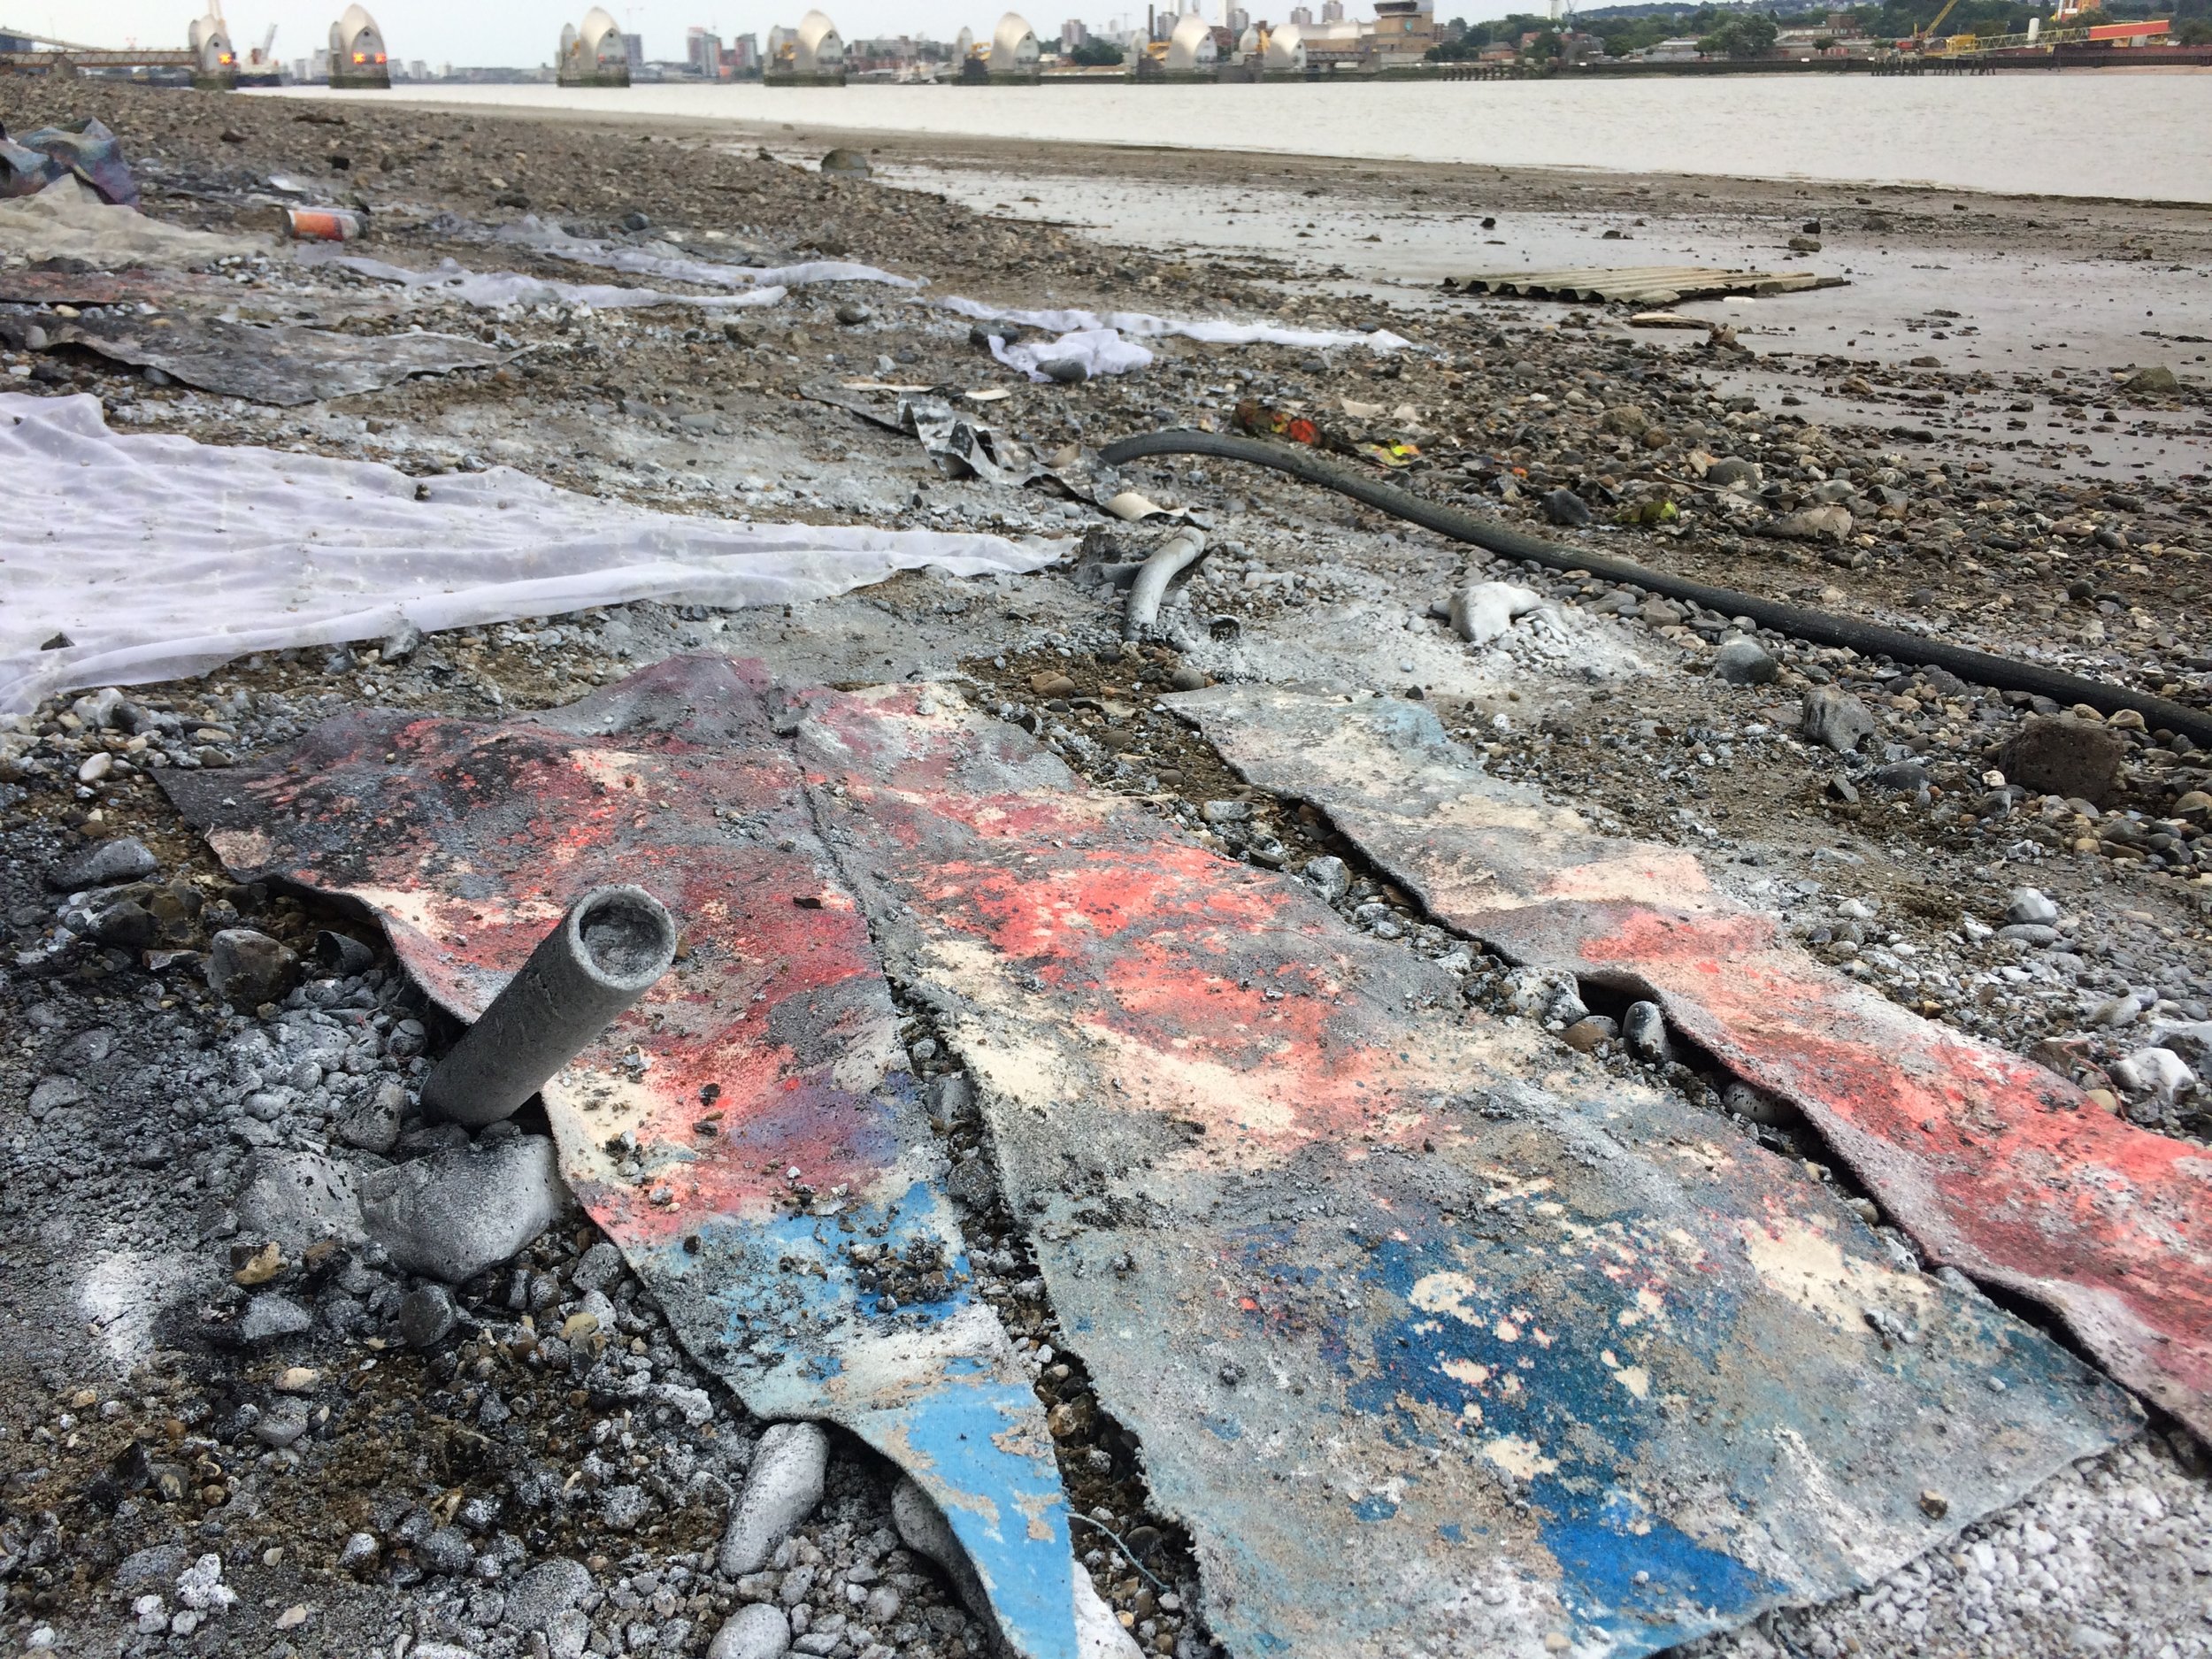  Low tide sludge and pebble painting.  North Greenwich, London 2018.     